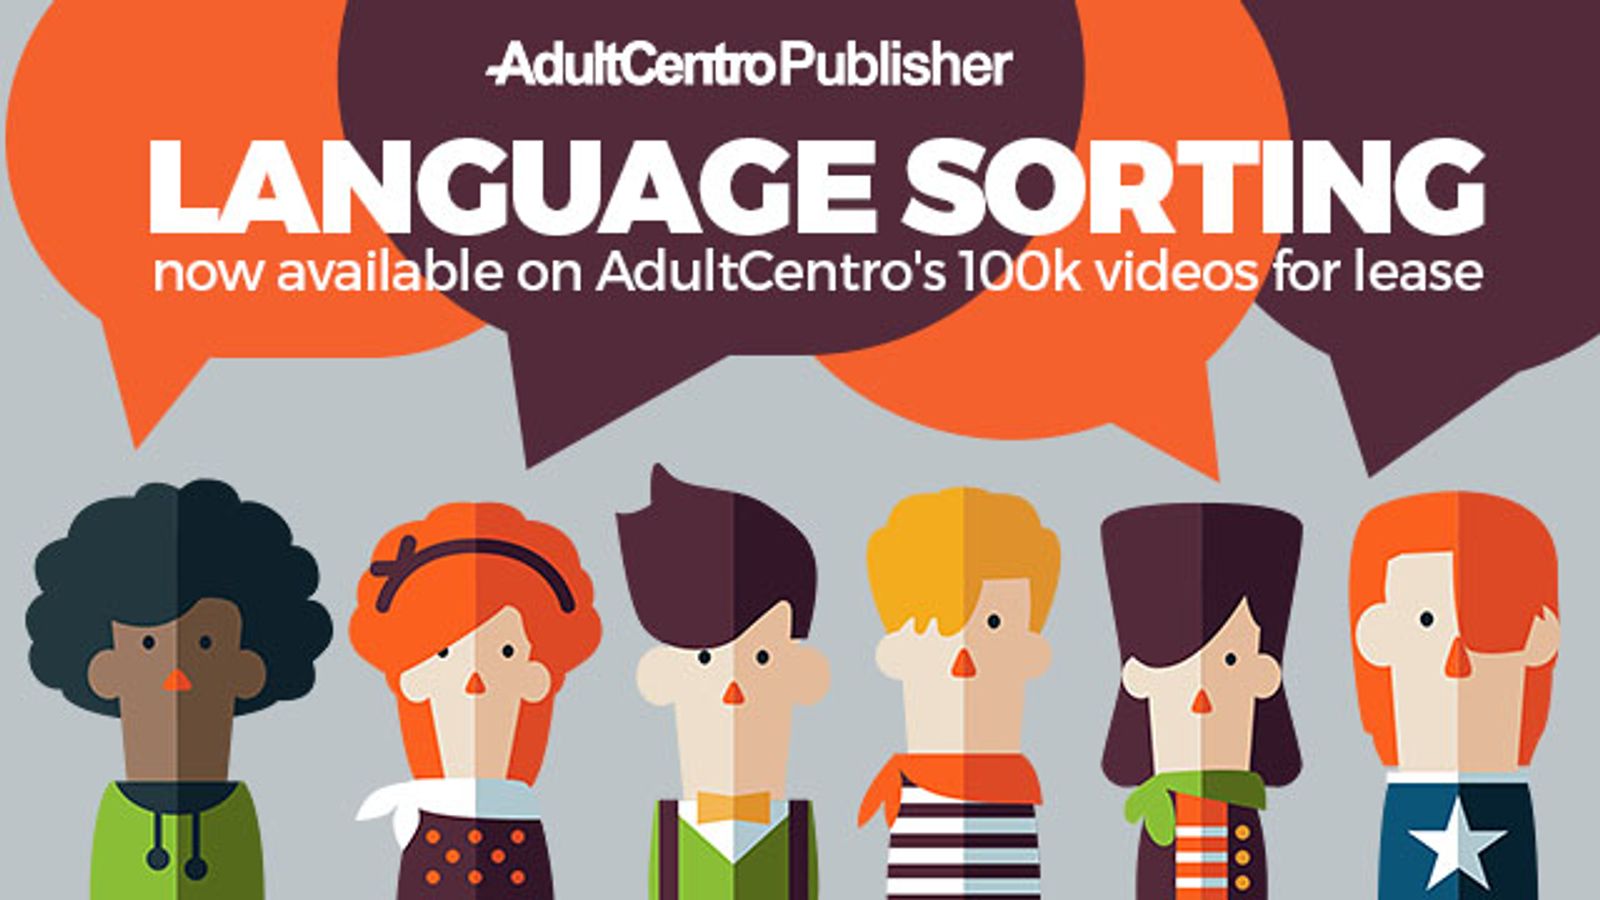 AdultCentro Publisher Now Offers Language Sorting On Vast Library